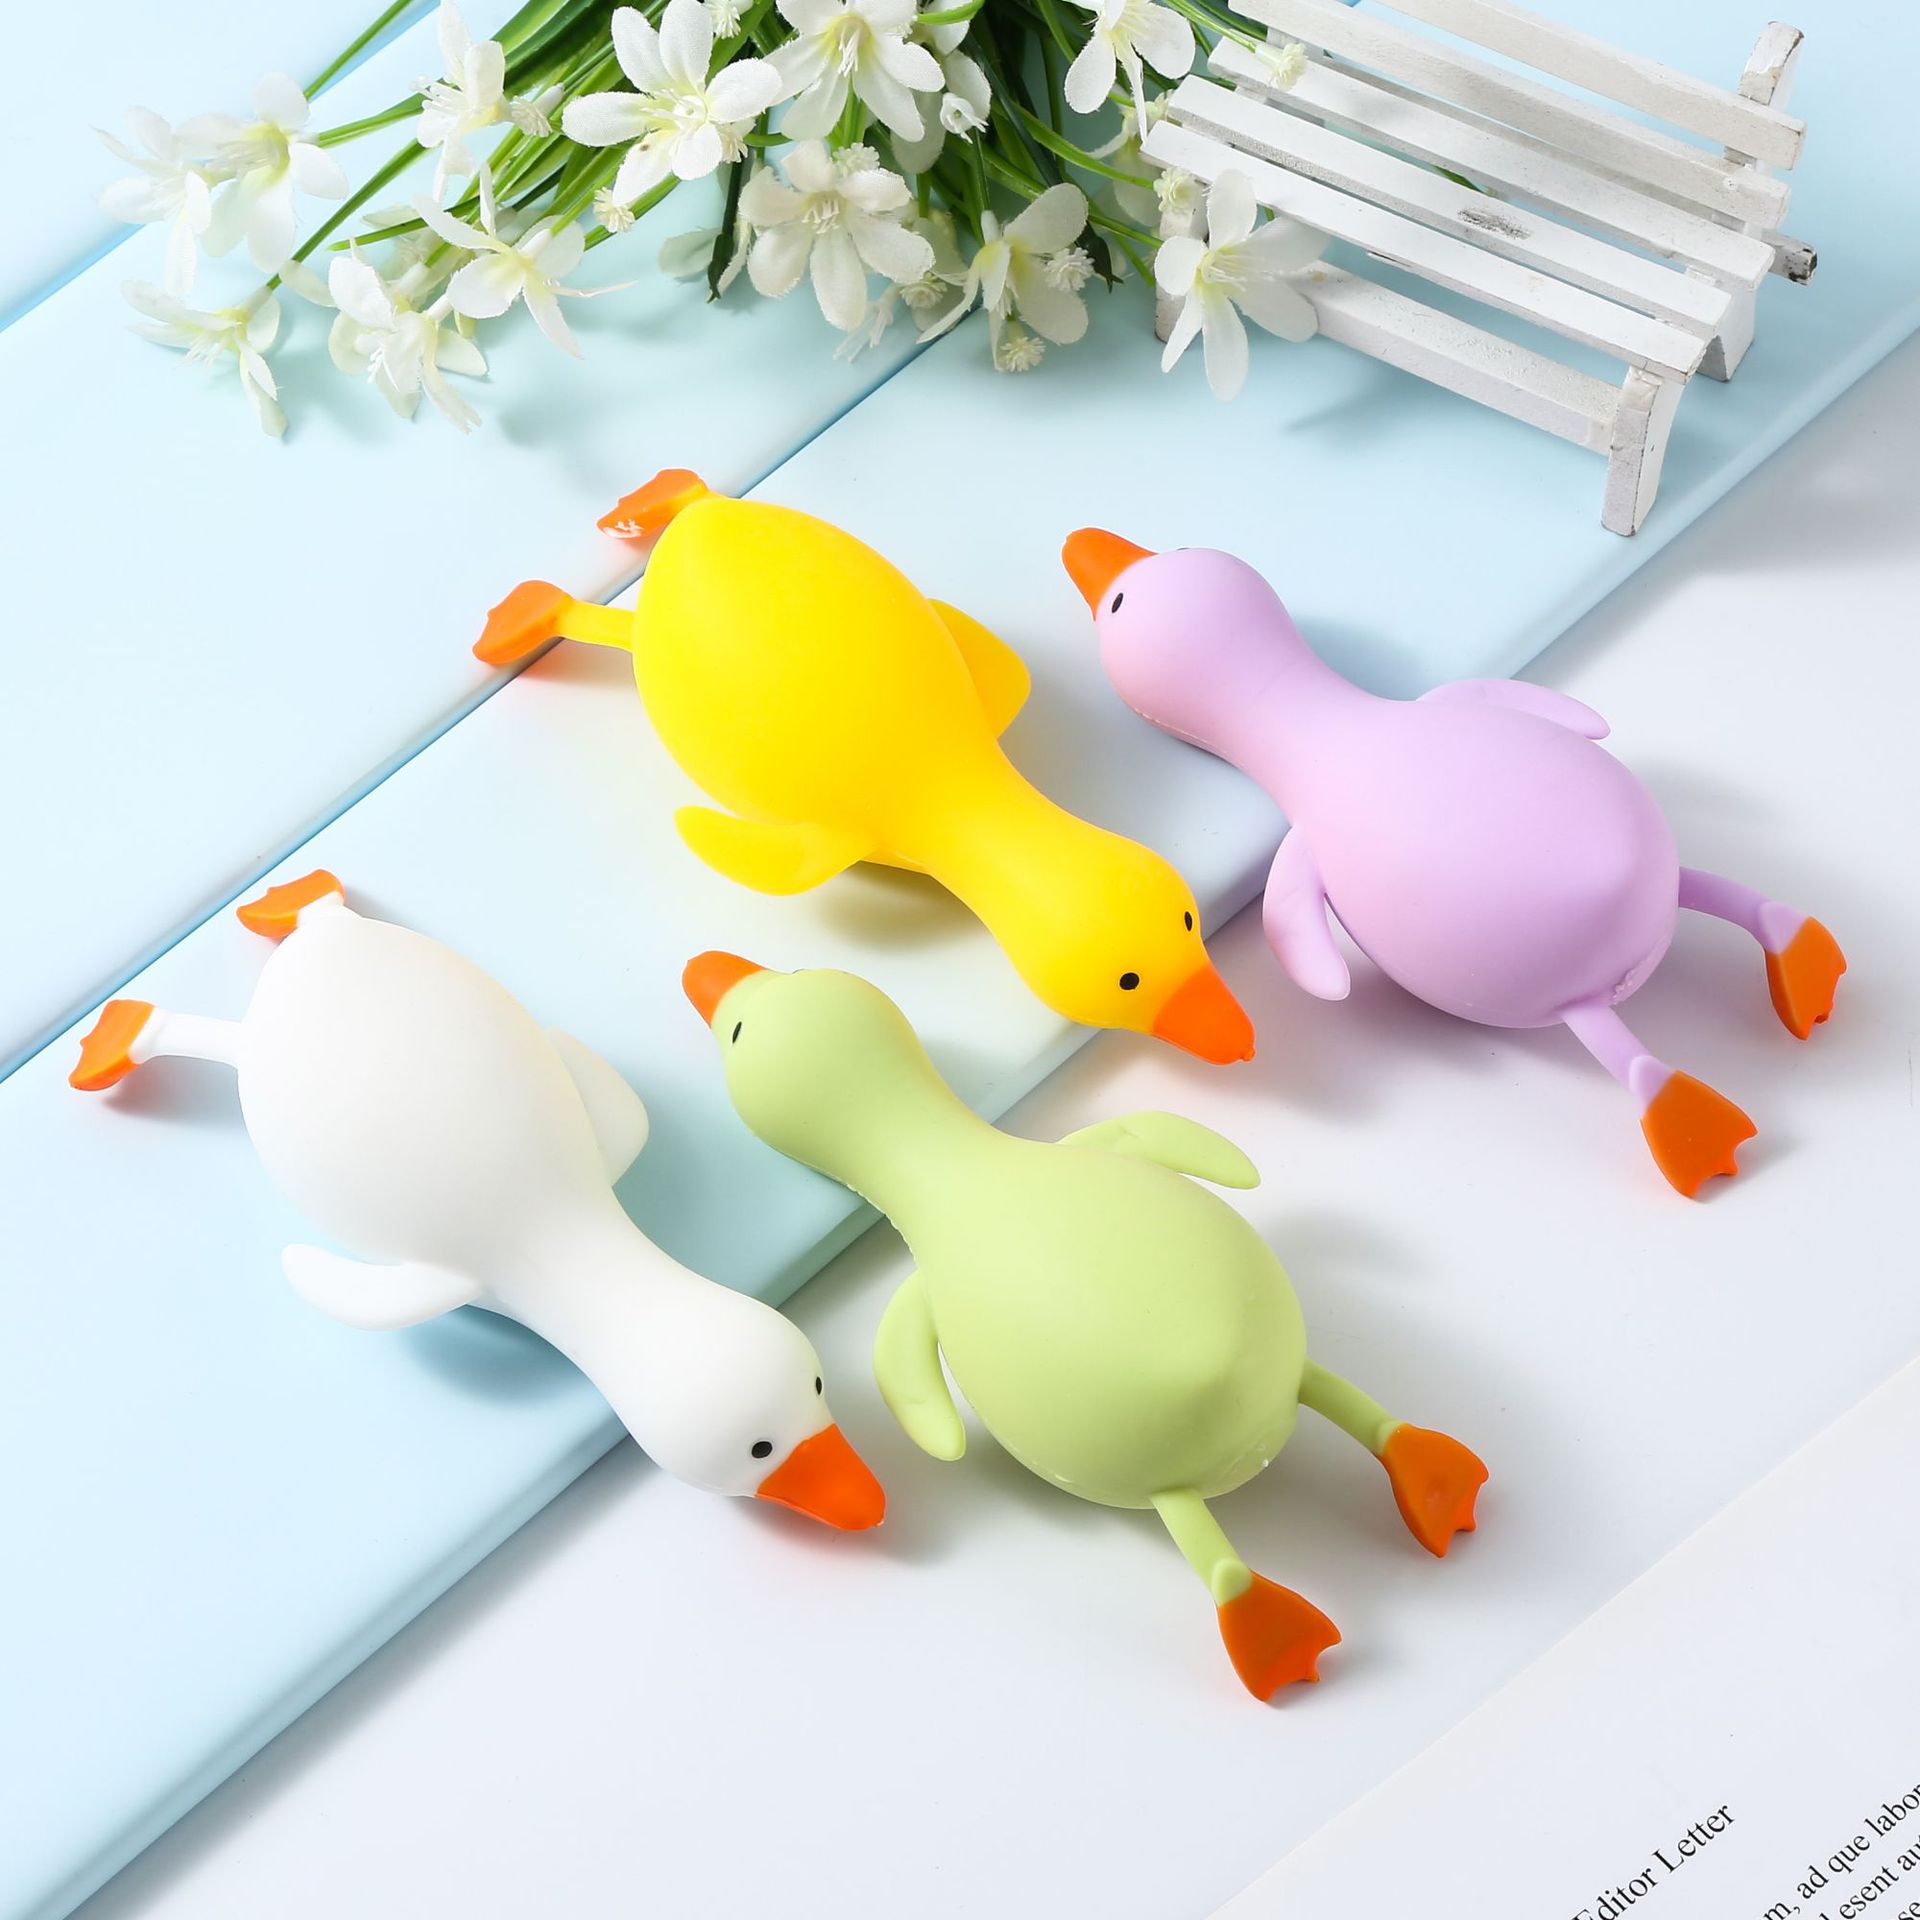 Ugly and Cute Cute Duck Decompression Squeezing Toy Decompression Toy Squeezing Toy Pressure Reduction Toy Decompression Artifact Internet-Famous Toys